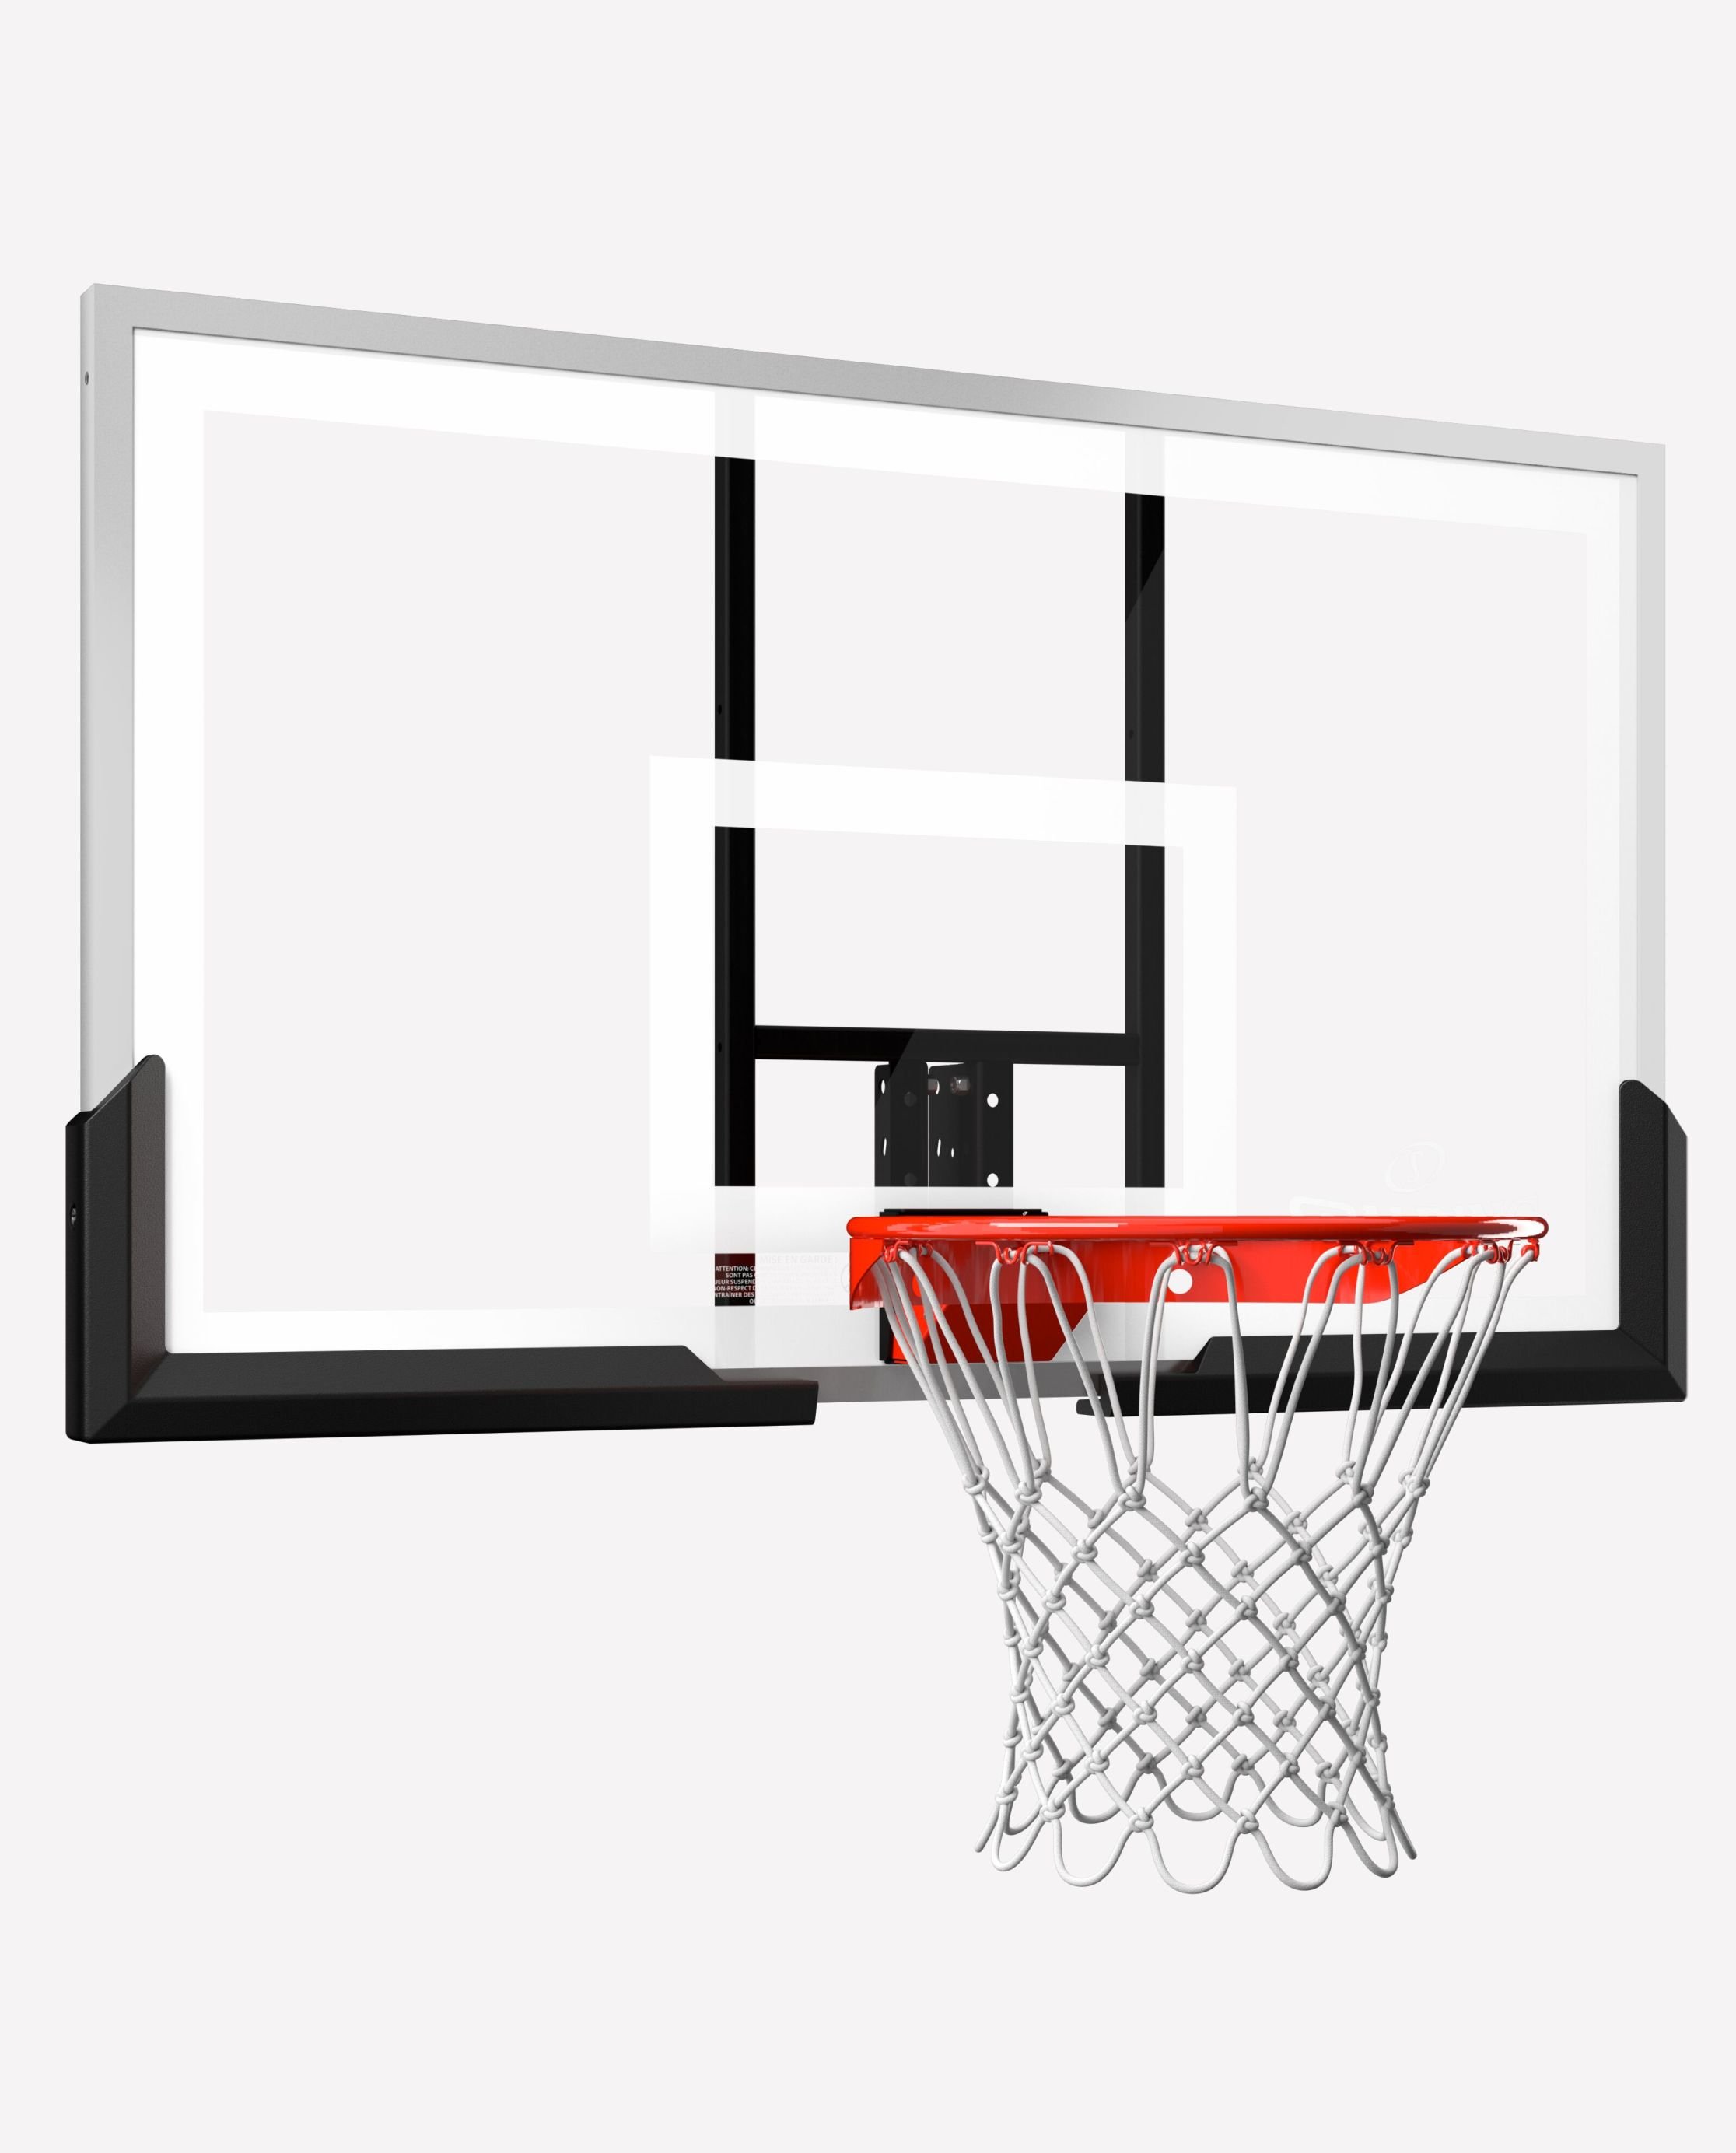 What is the diameter of a standard basketball hoop? - Quora